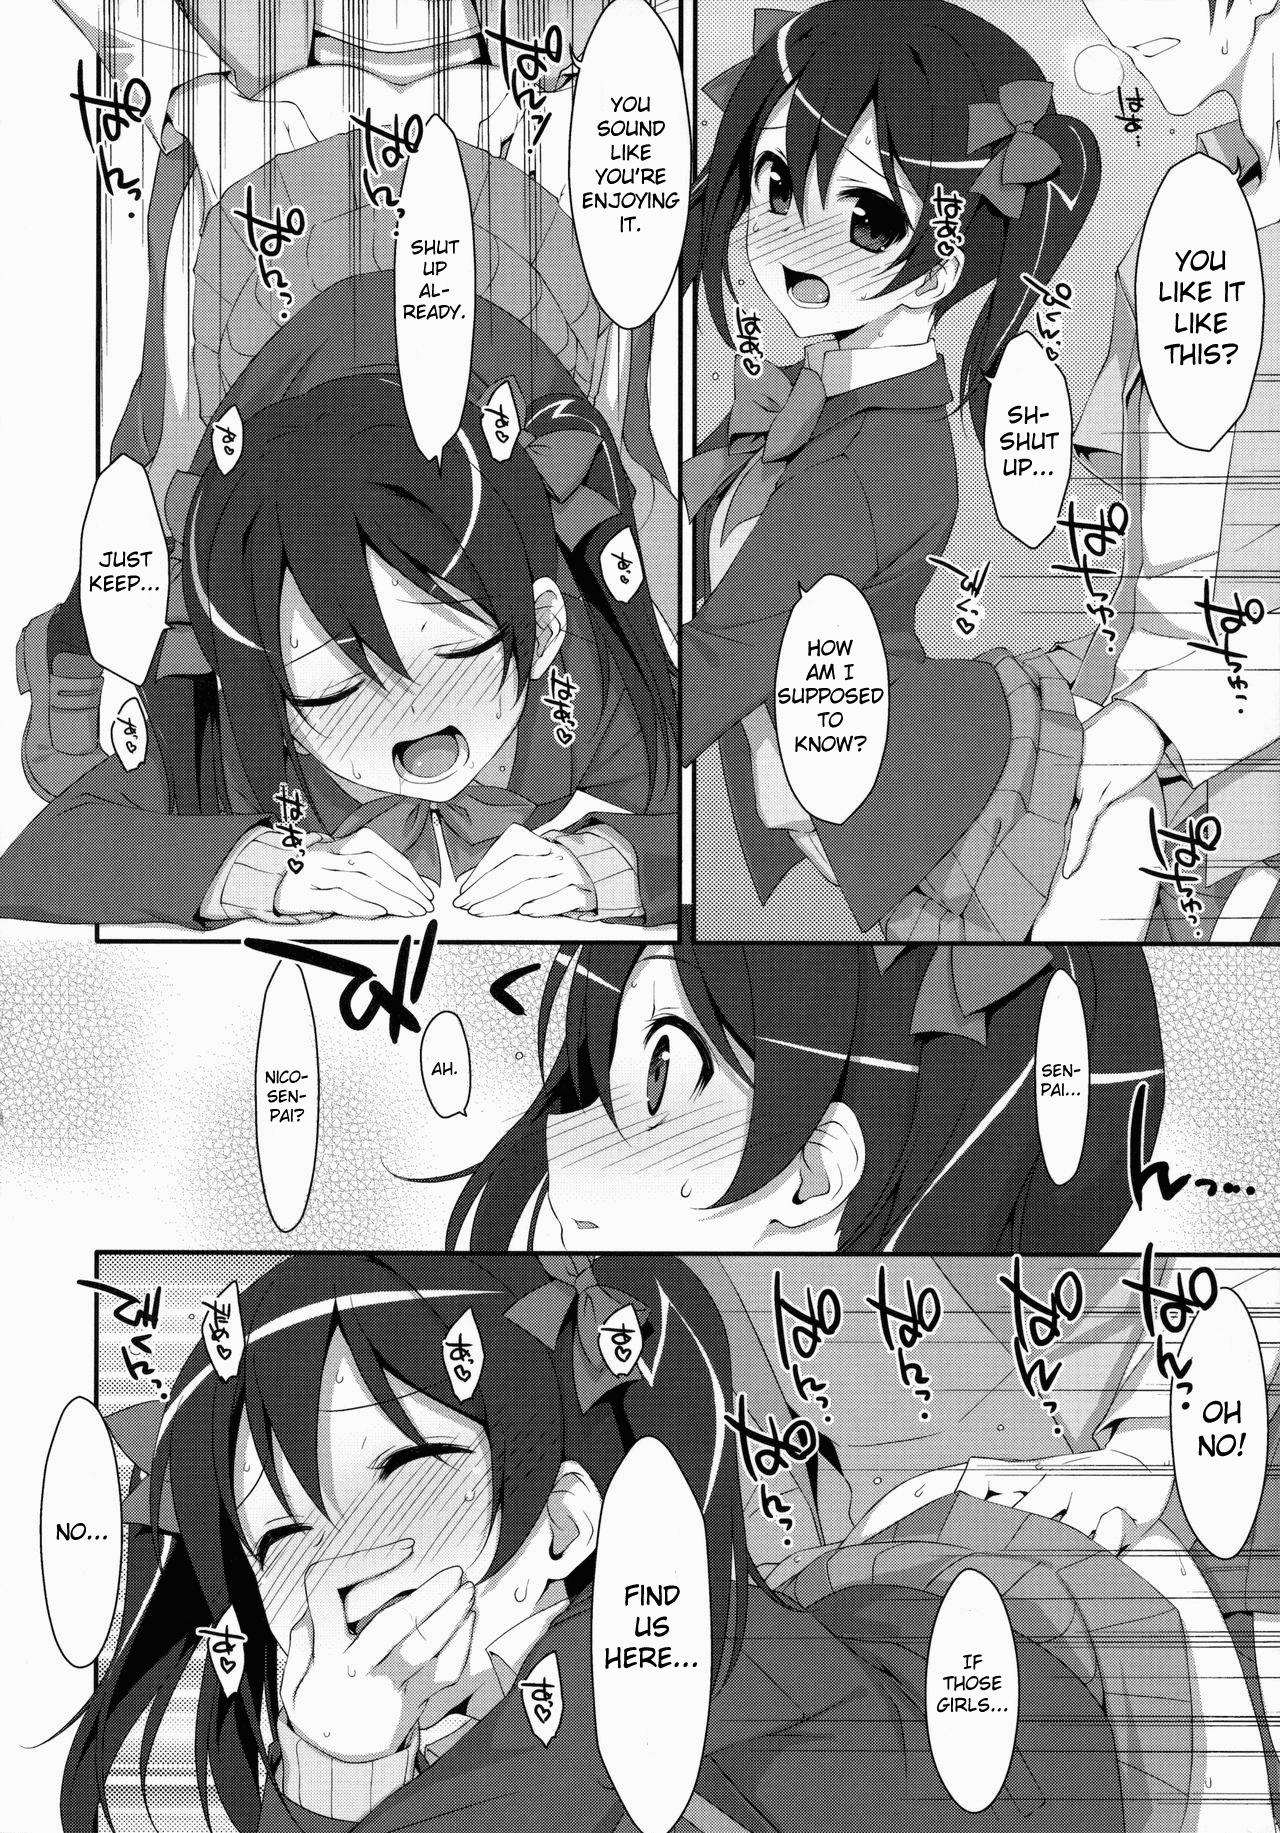 Jap LOVE NICO! one two - Love live Atm - Page 11